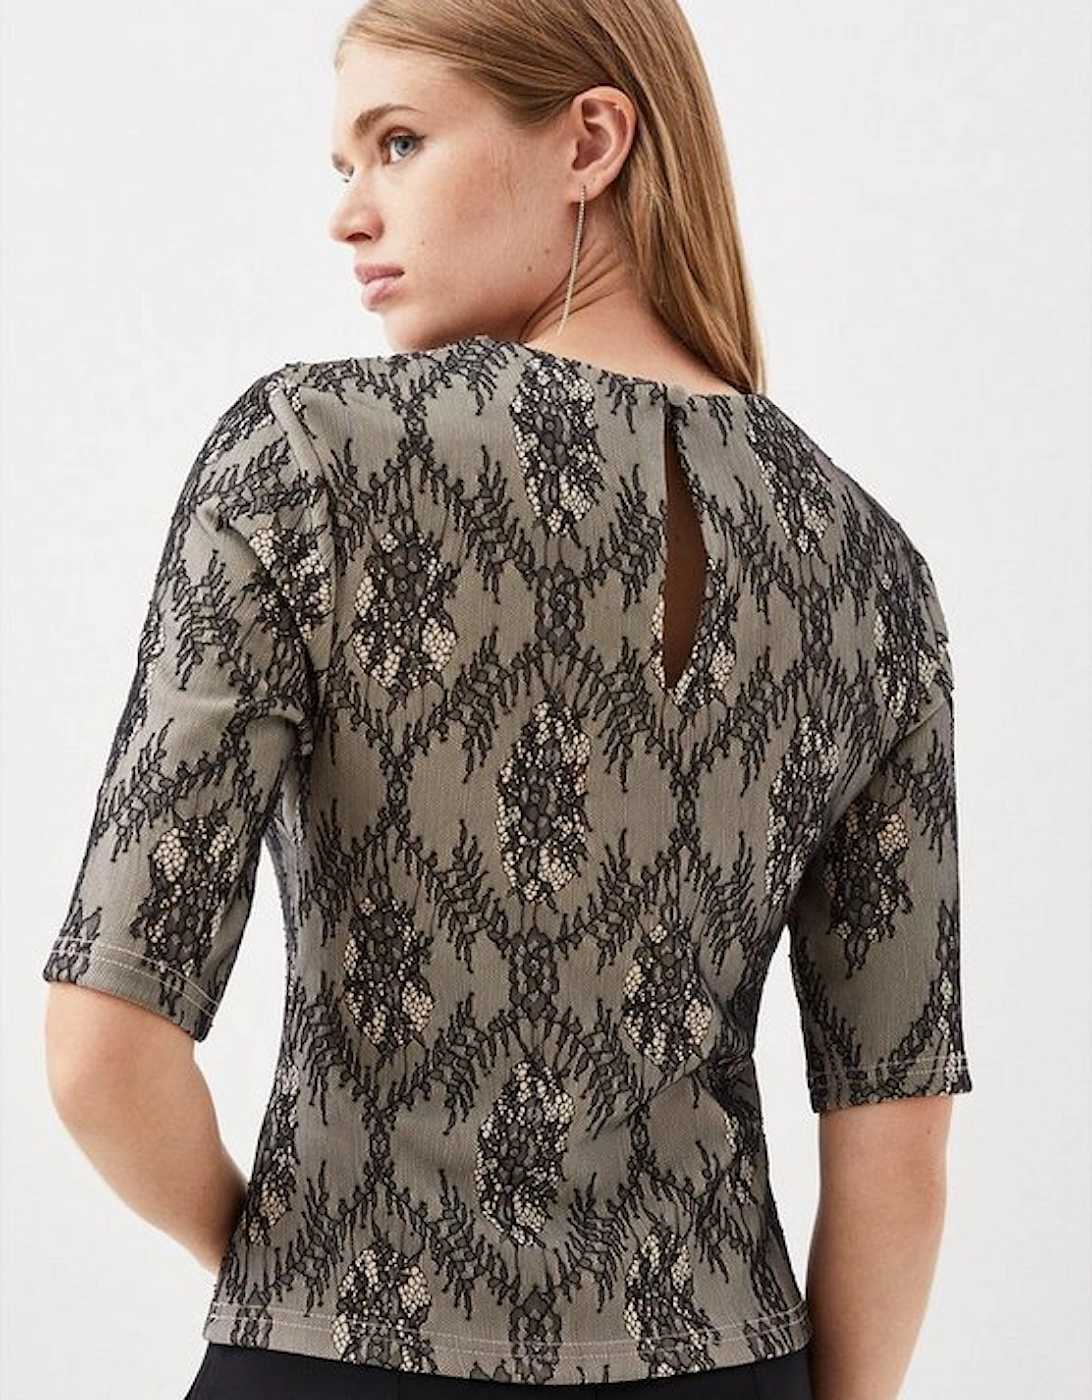 Jersey Lace Top